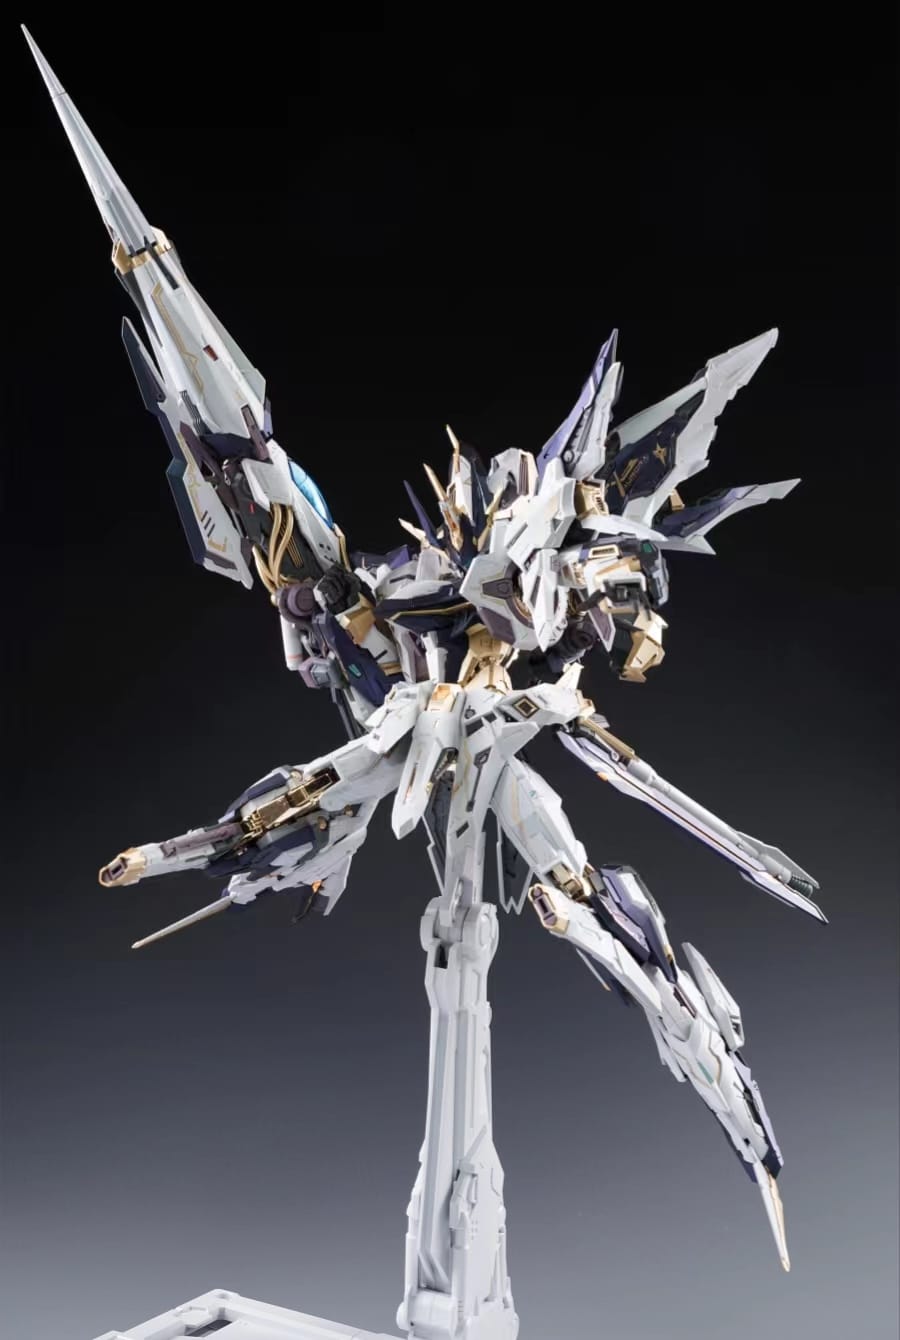 Ready stock - In Era+ X Perfection Metal Design 1/100 Aurora Imperial Dawn Knight Troops